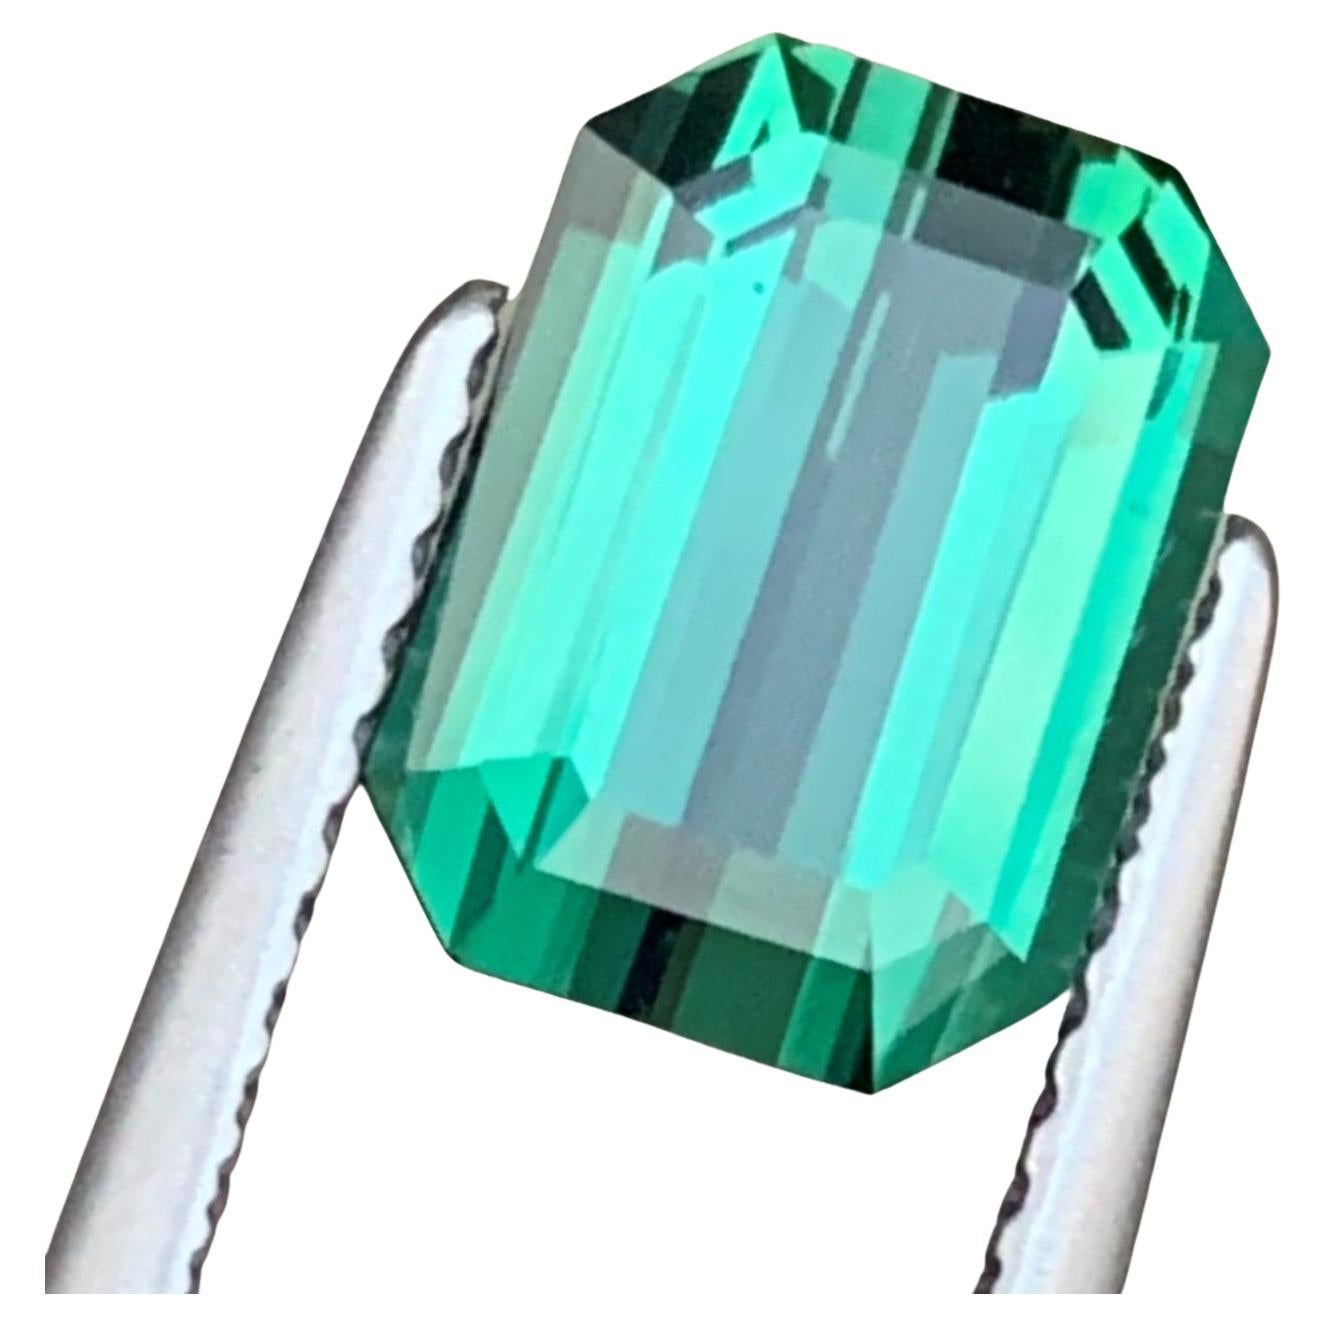 2.20 Carat Loose Lagoon Tourmaline Emerald Shape Gemstone Available for Sell For Sale